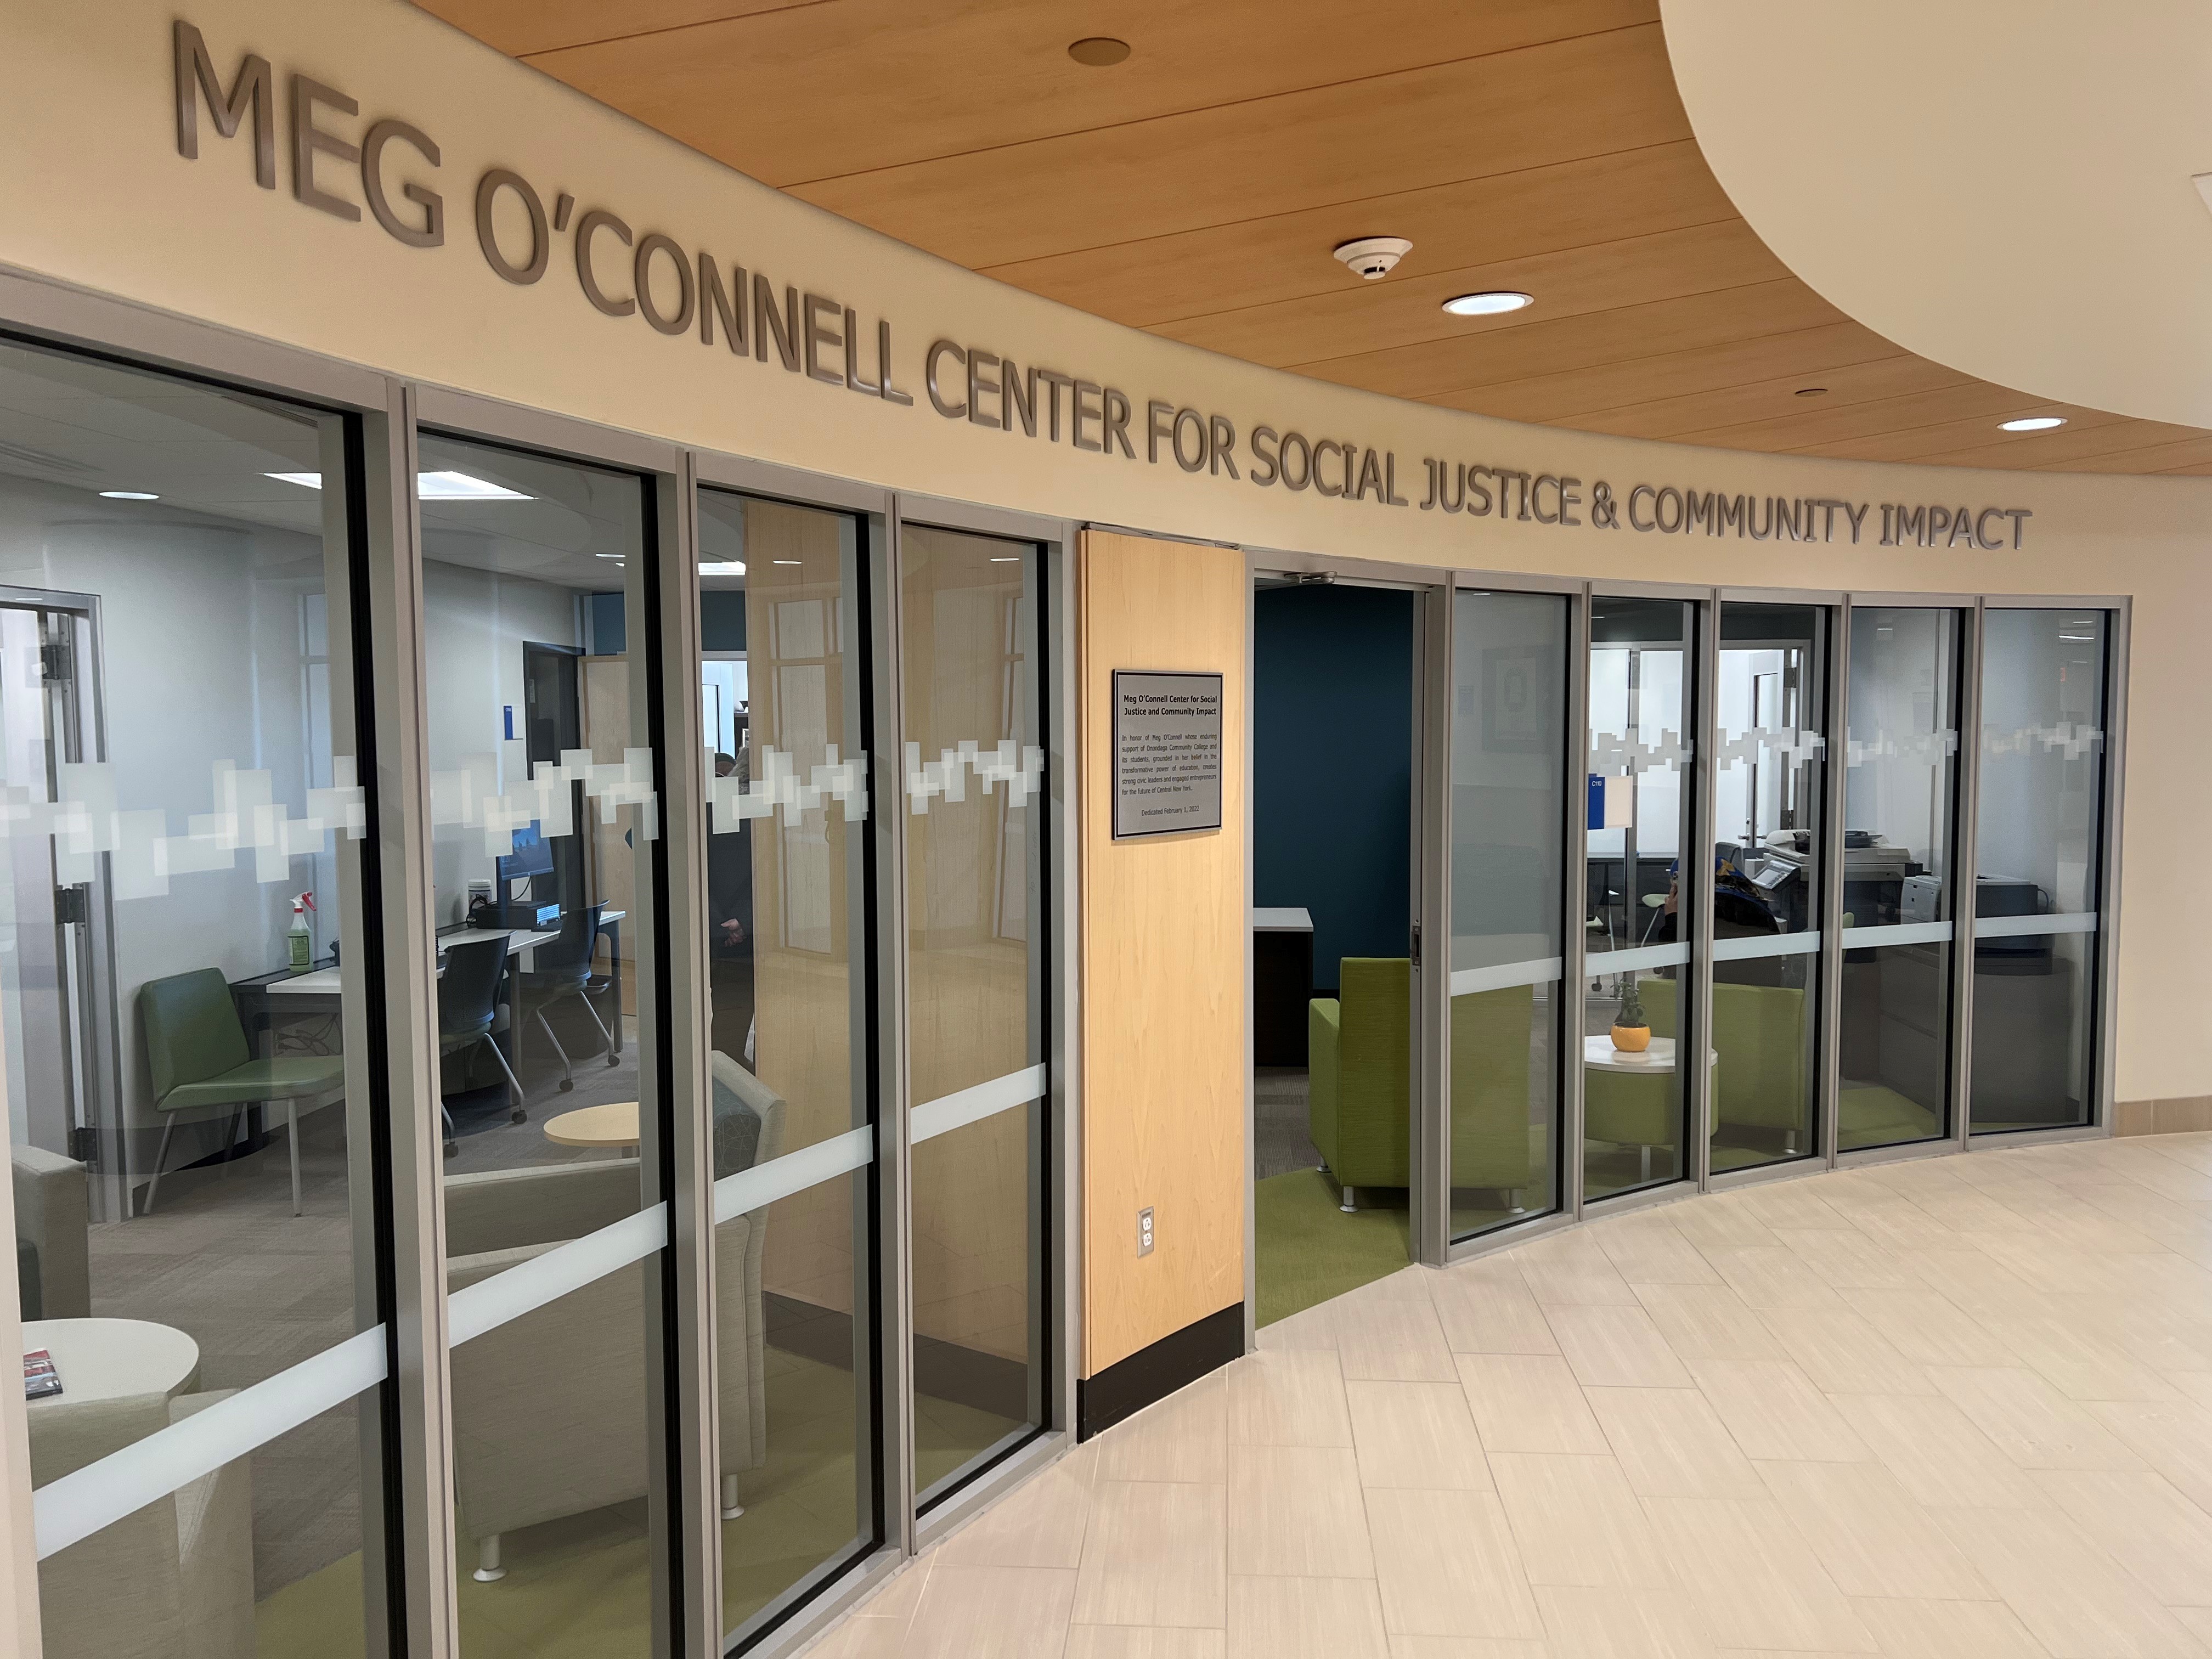 The Meg O'Connell Center for Social Justice and Community Impact is located on the first floor of Coulter Hall.